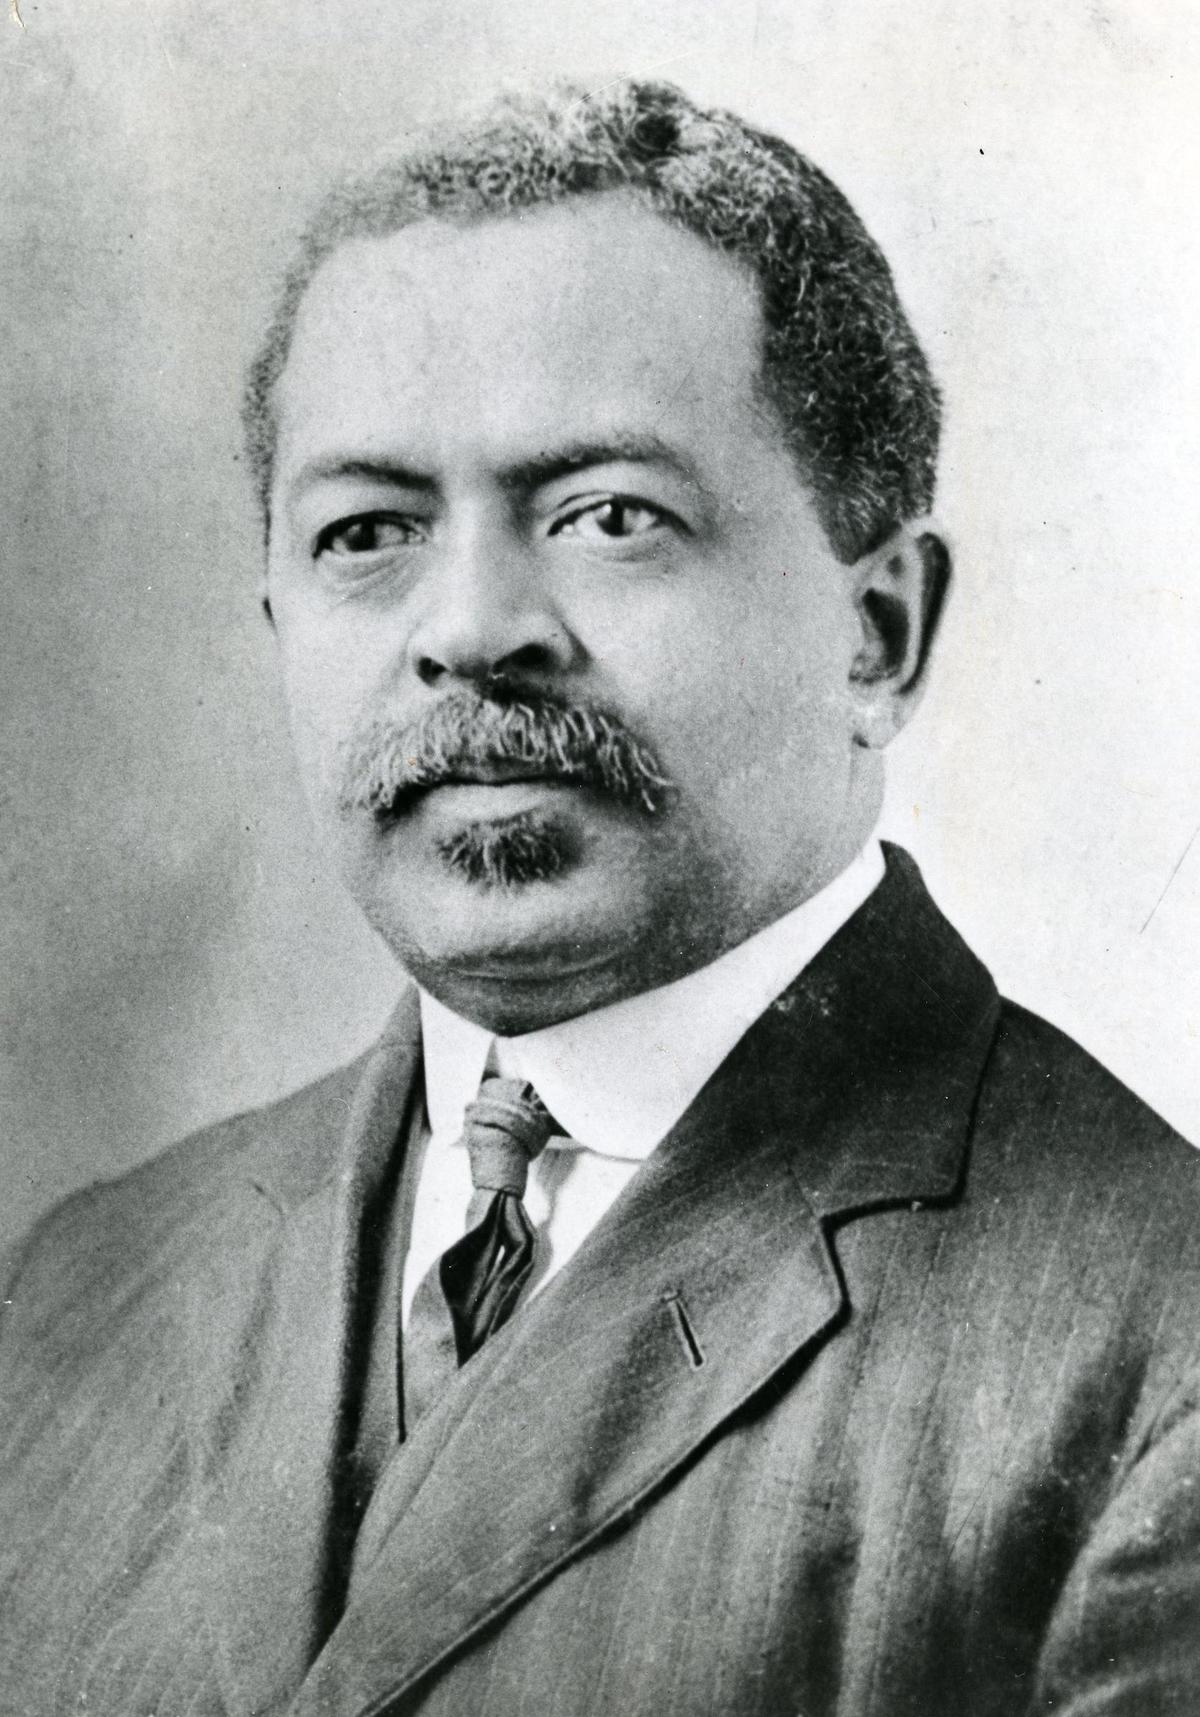 A c.1920 photographic portrait of William Monroe Trotter in a 3-piece suit and tie.